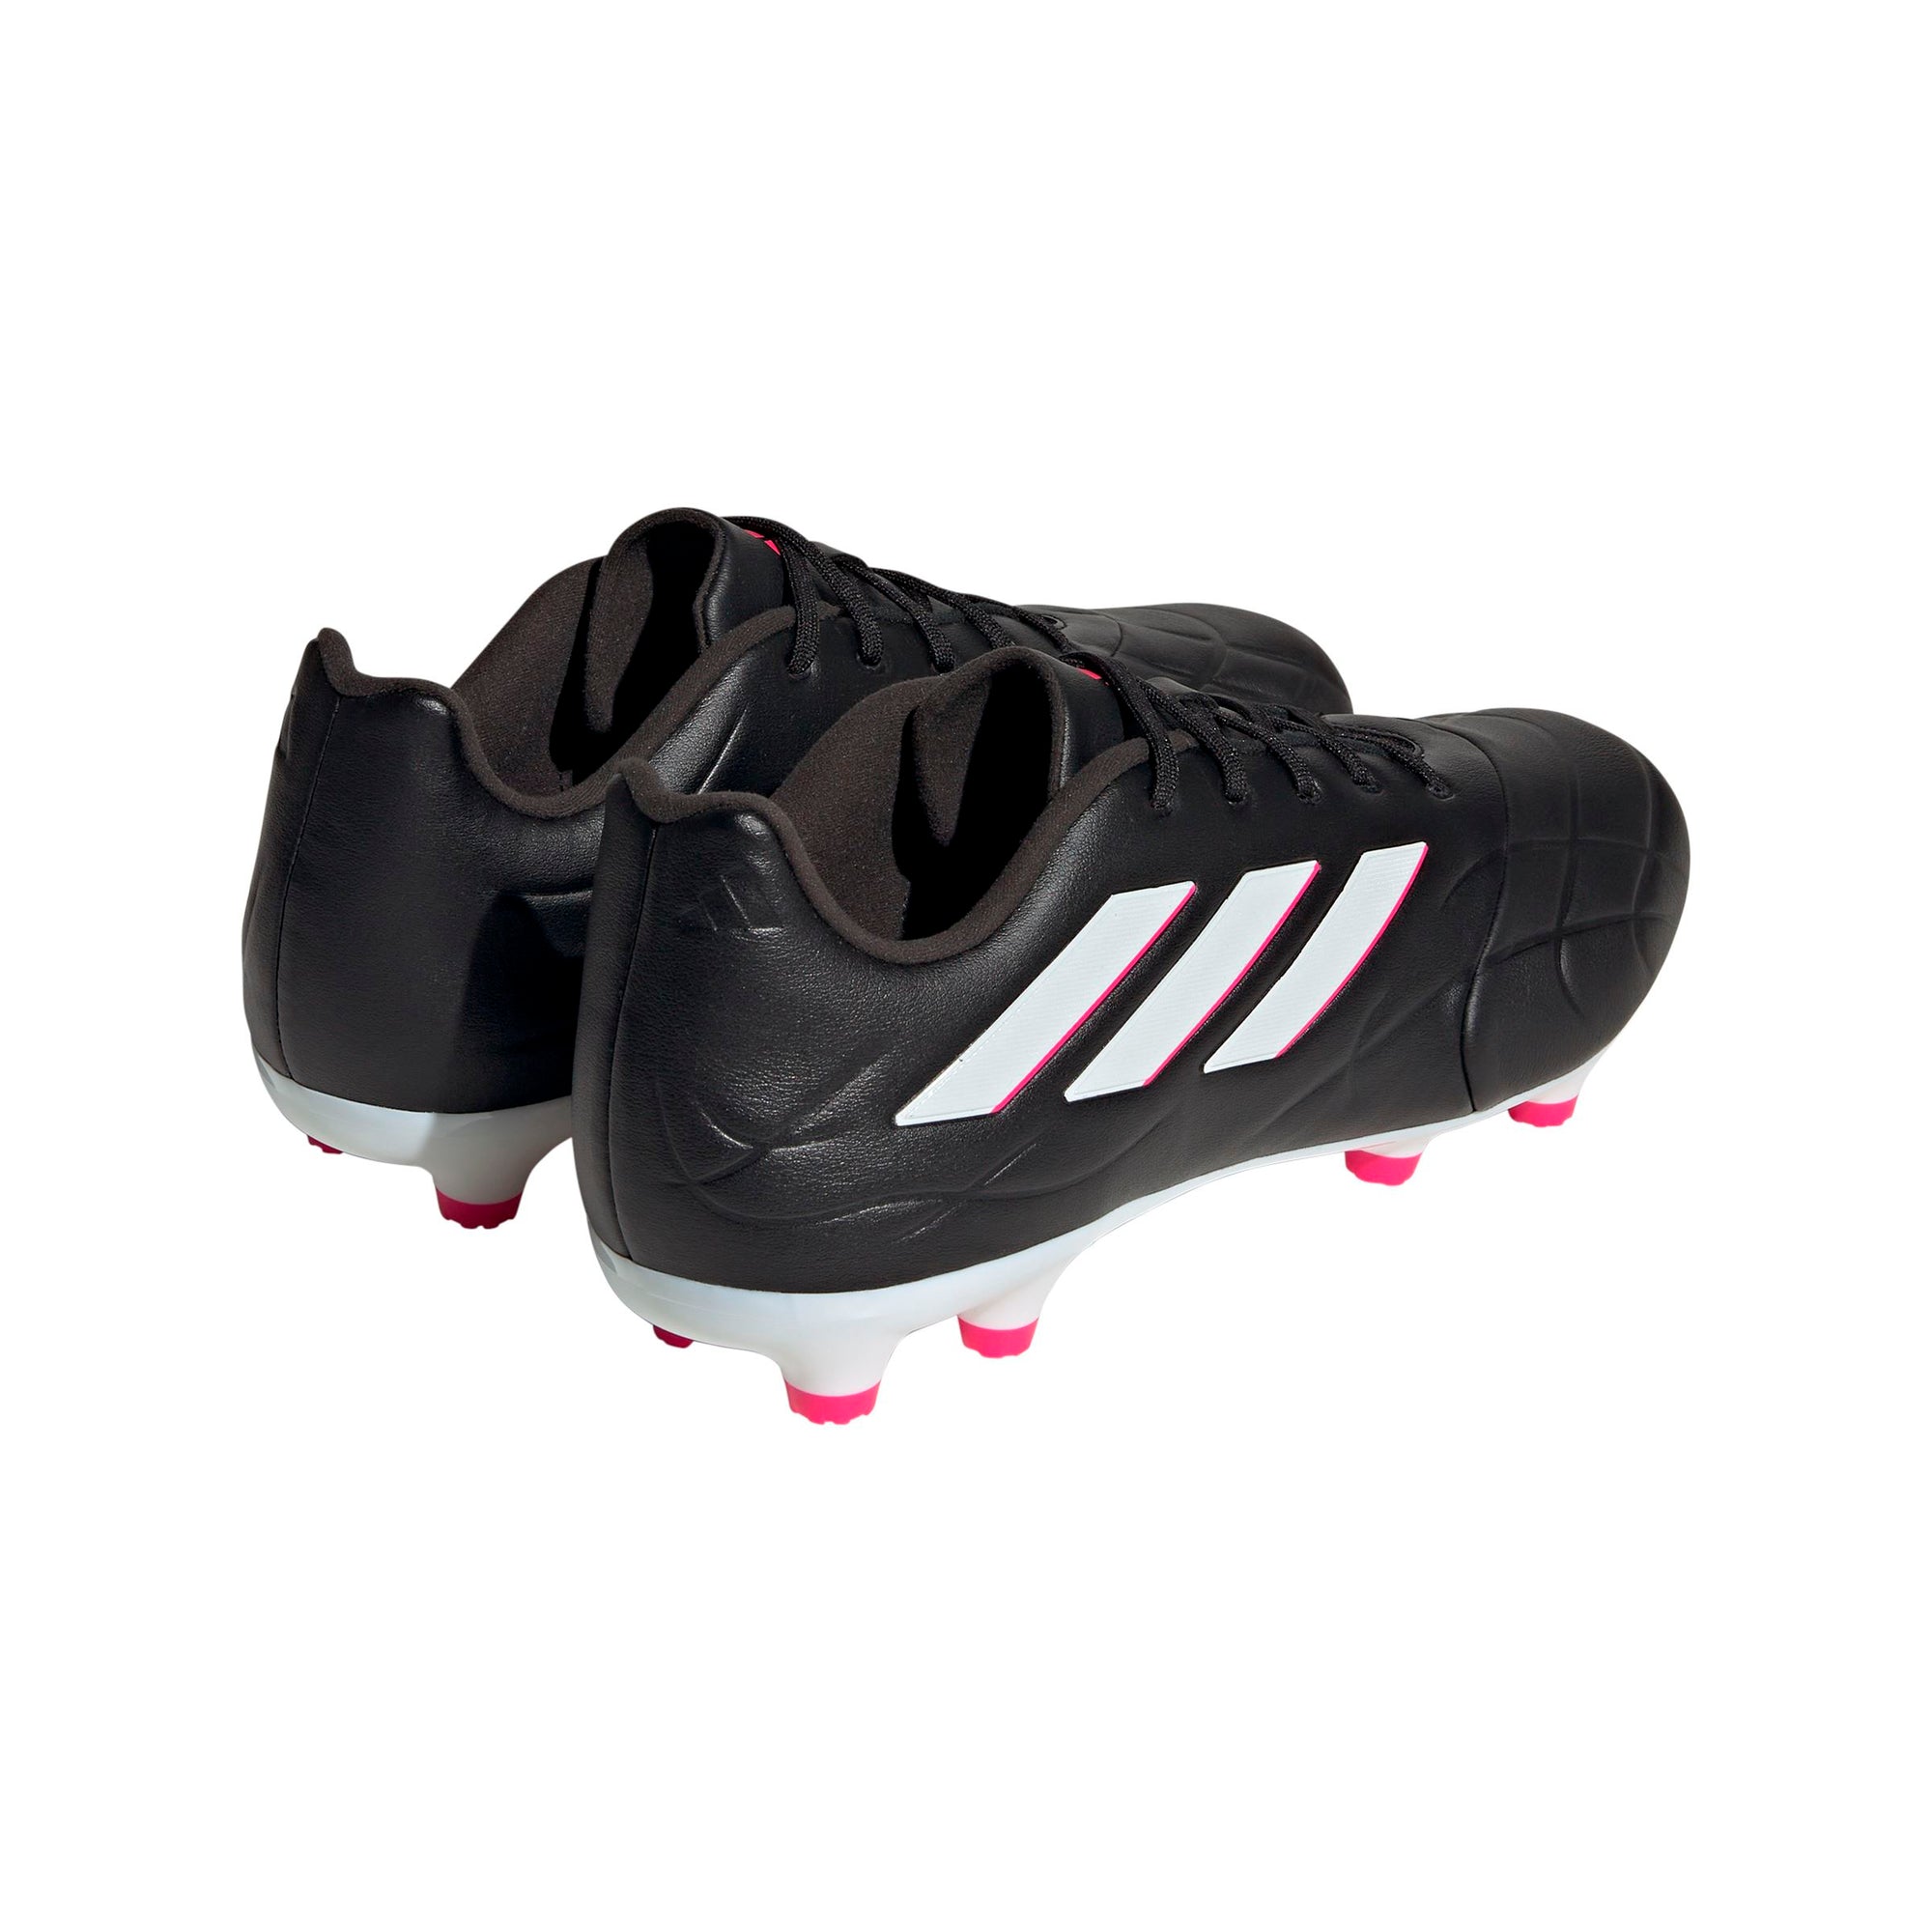 adidas Unisex Copa Pure.3 Firm Ground Cleats | HQ8942 Cleats Adidas 